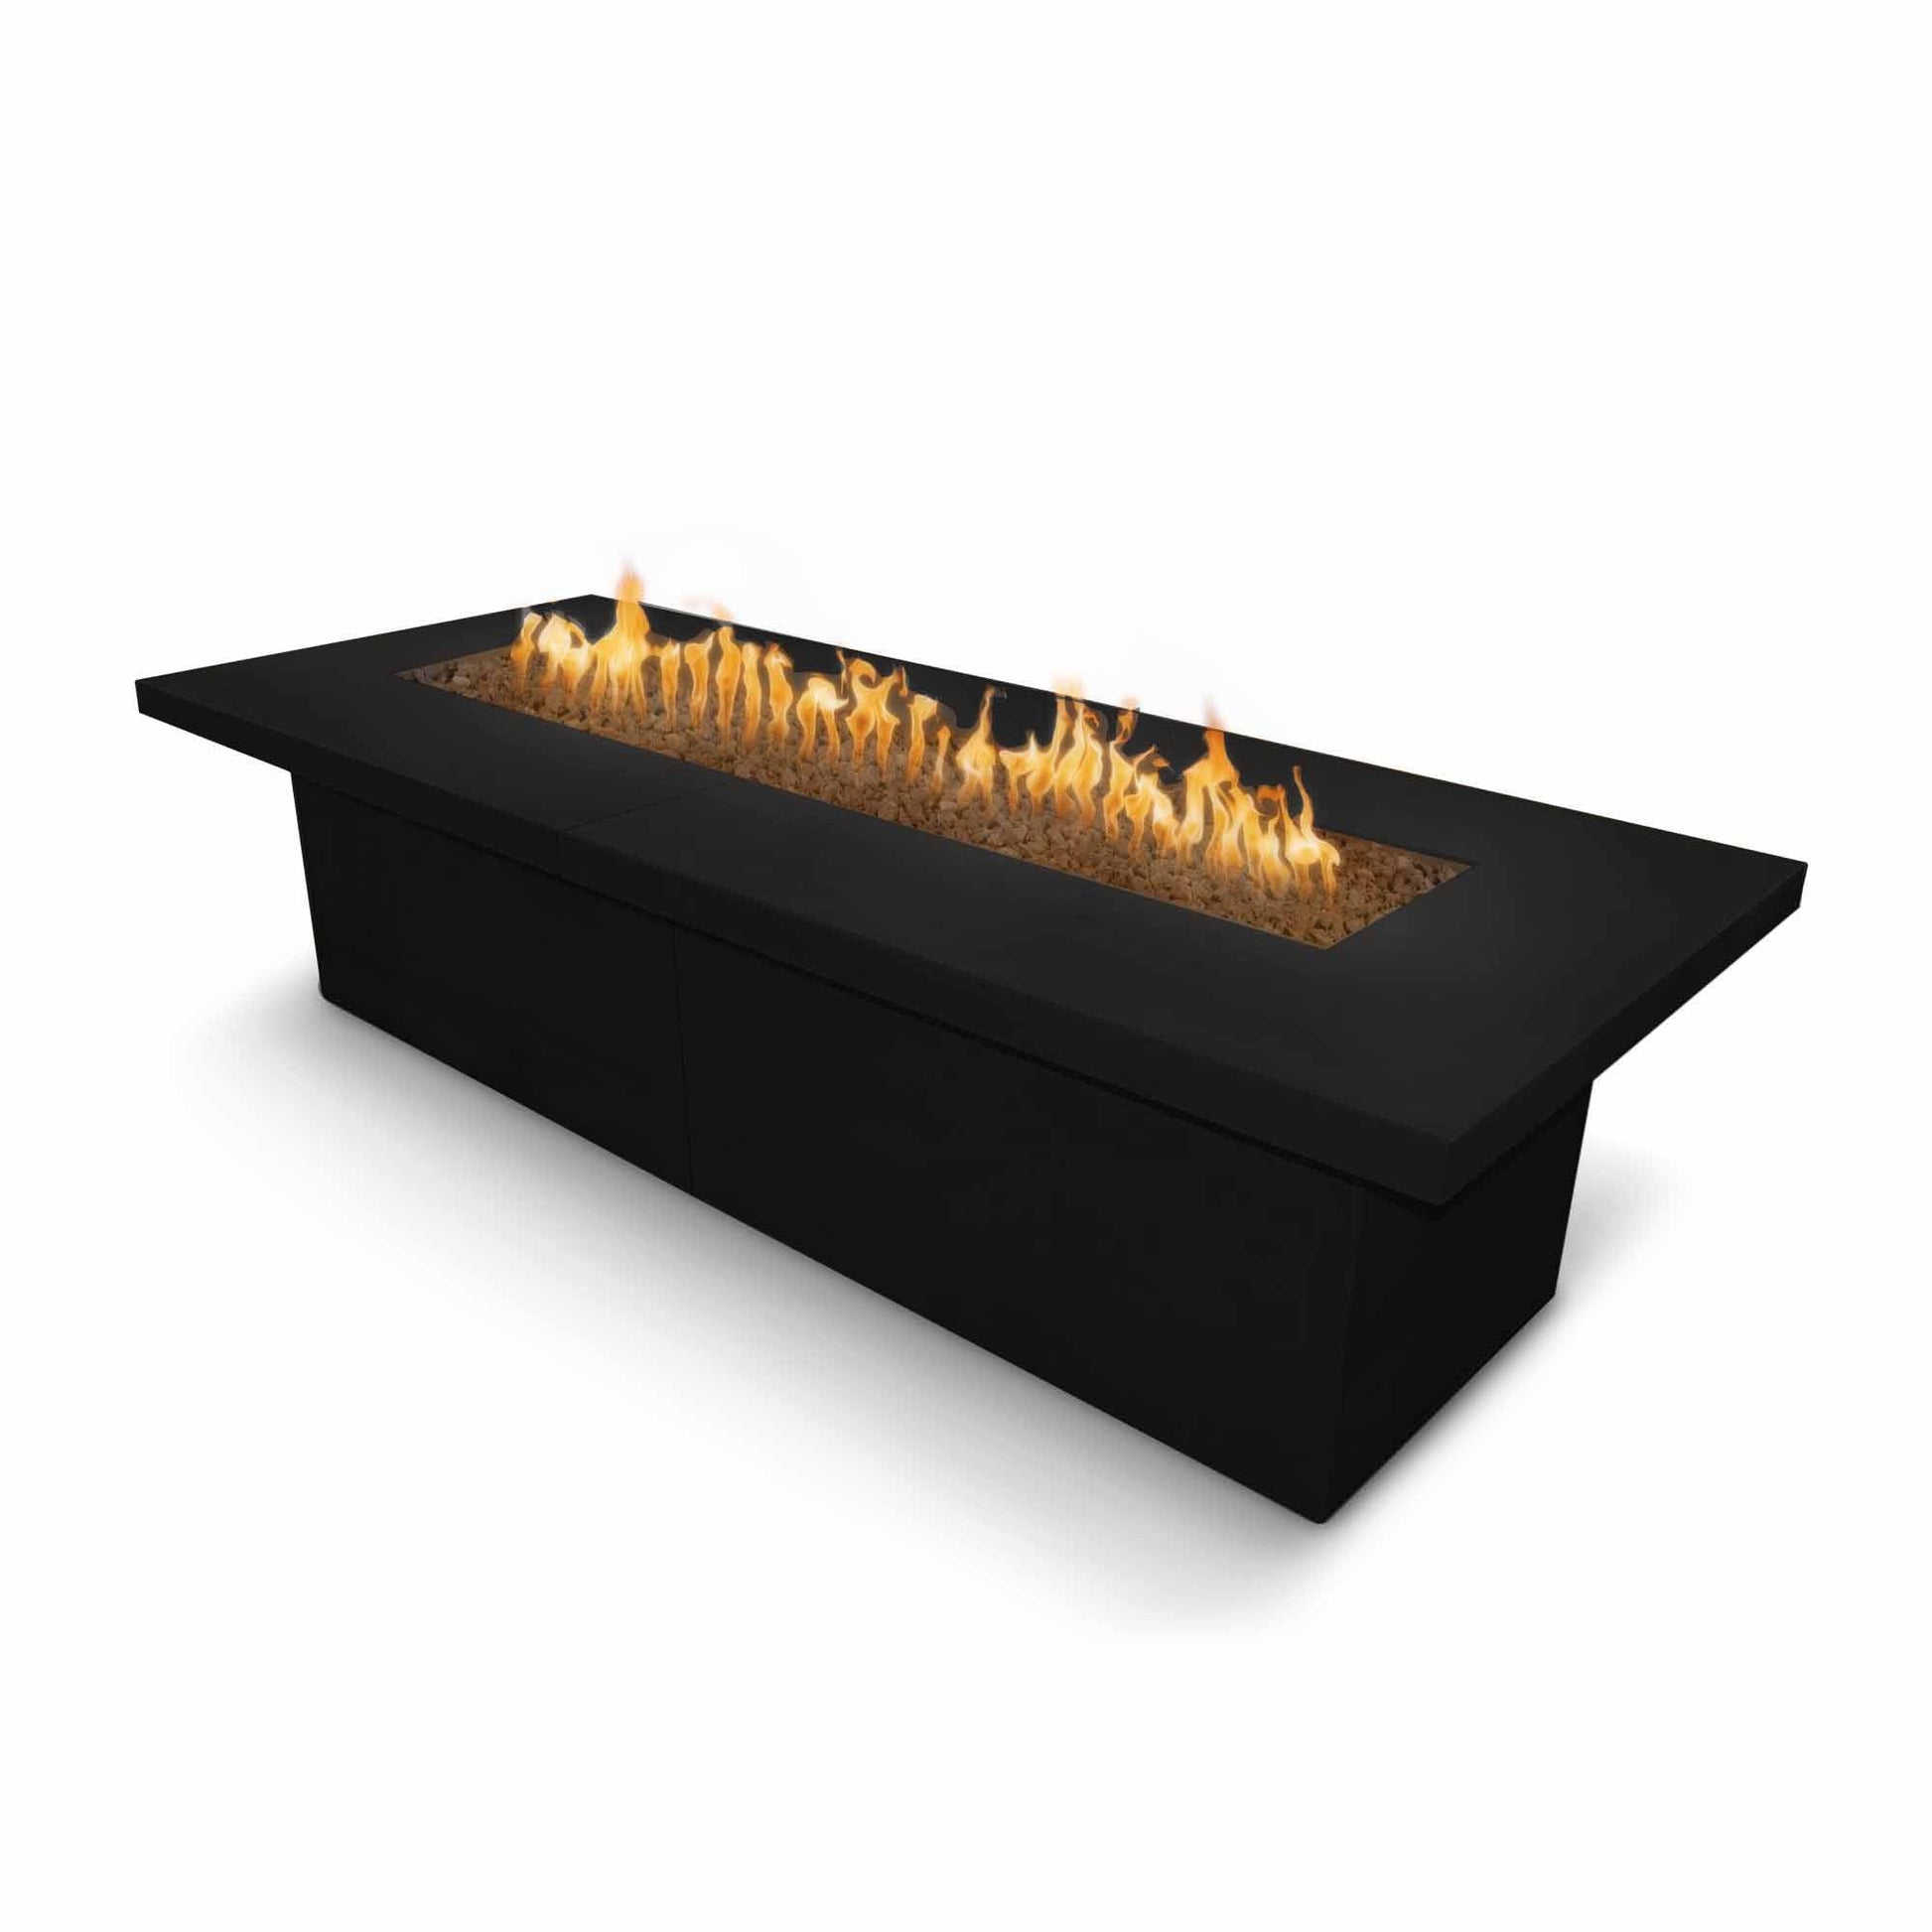 The Outdoor Plus Rectangular Newport 72" White Powder Coated Metal Liquid Propane Fire Pit with Match Lit with Flame Sense Ignition